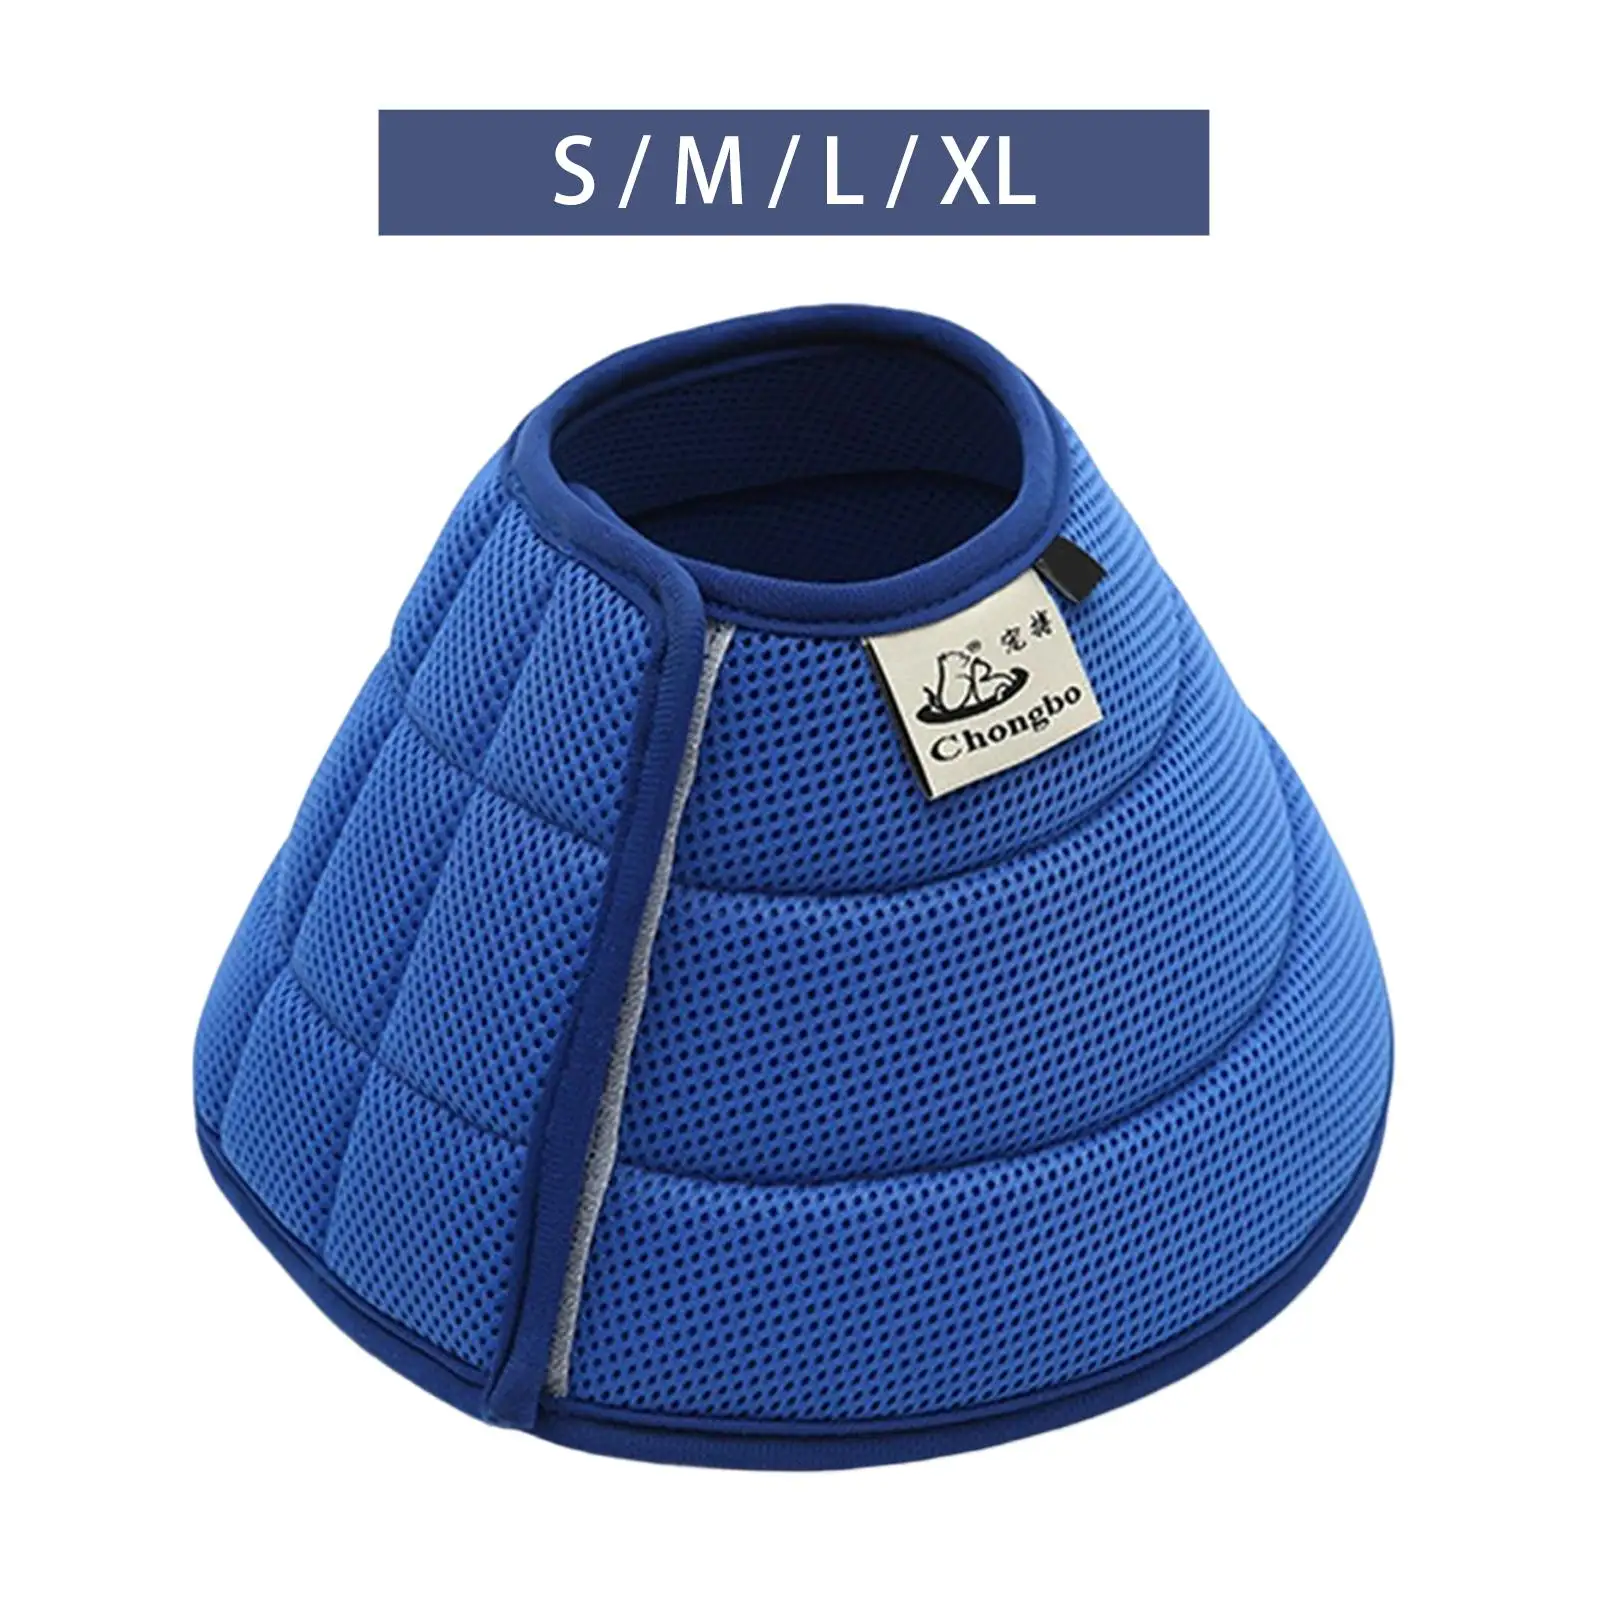 Cone Collar Protective Wound Protective Cone Prevent Biting & Scratching